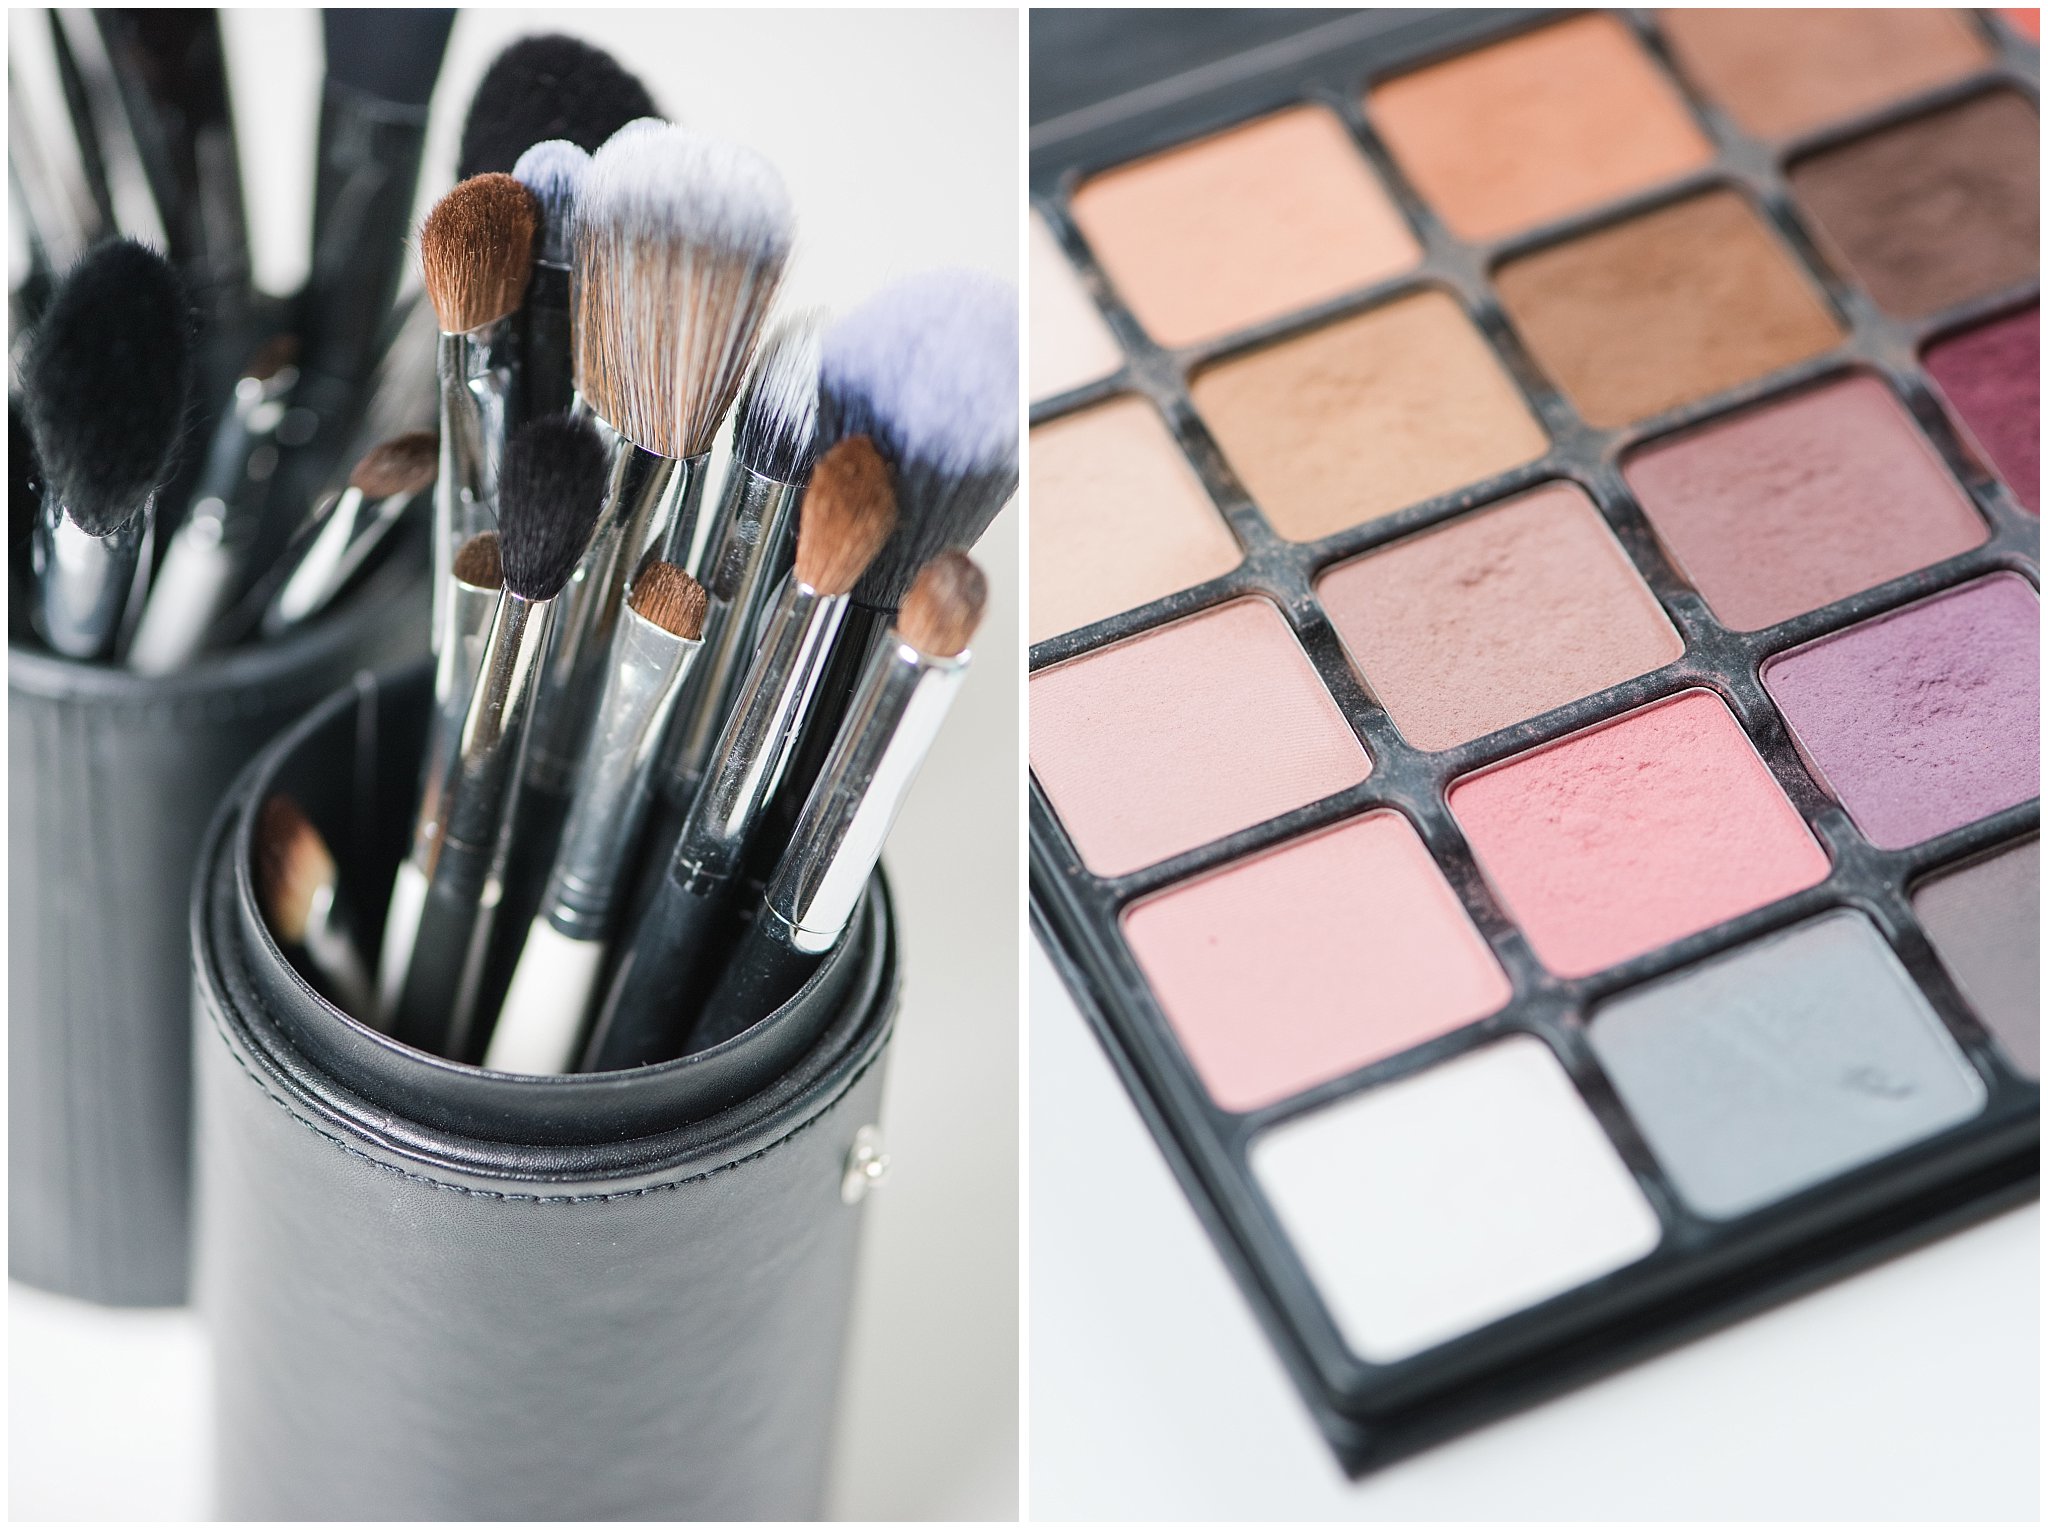 Makeup brushes and eyeshadow pallette | Utah Wedding Hair and Makeup Artist | Sarah Hicken | Jessie and Dallin Photography